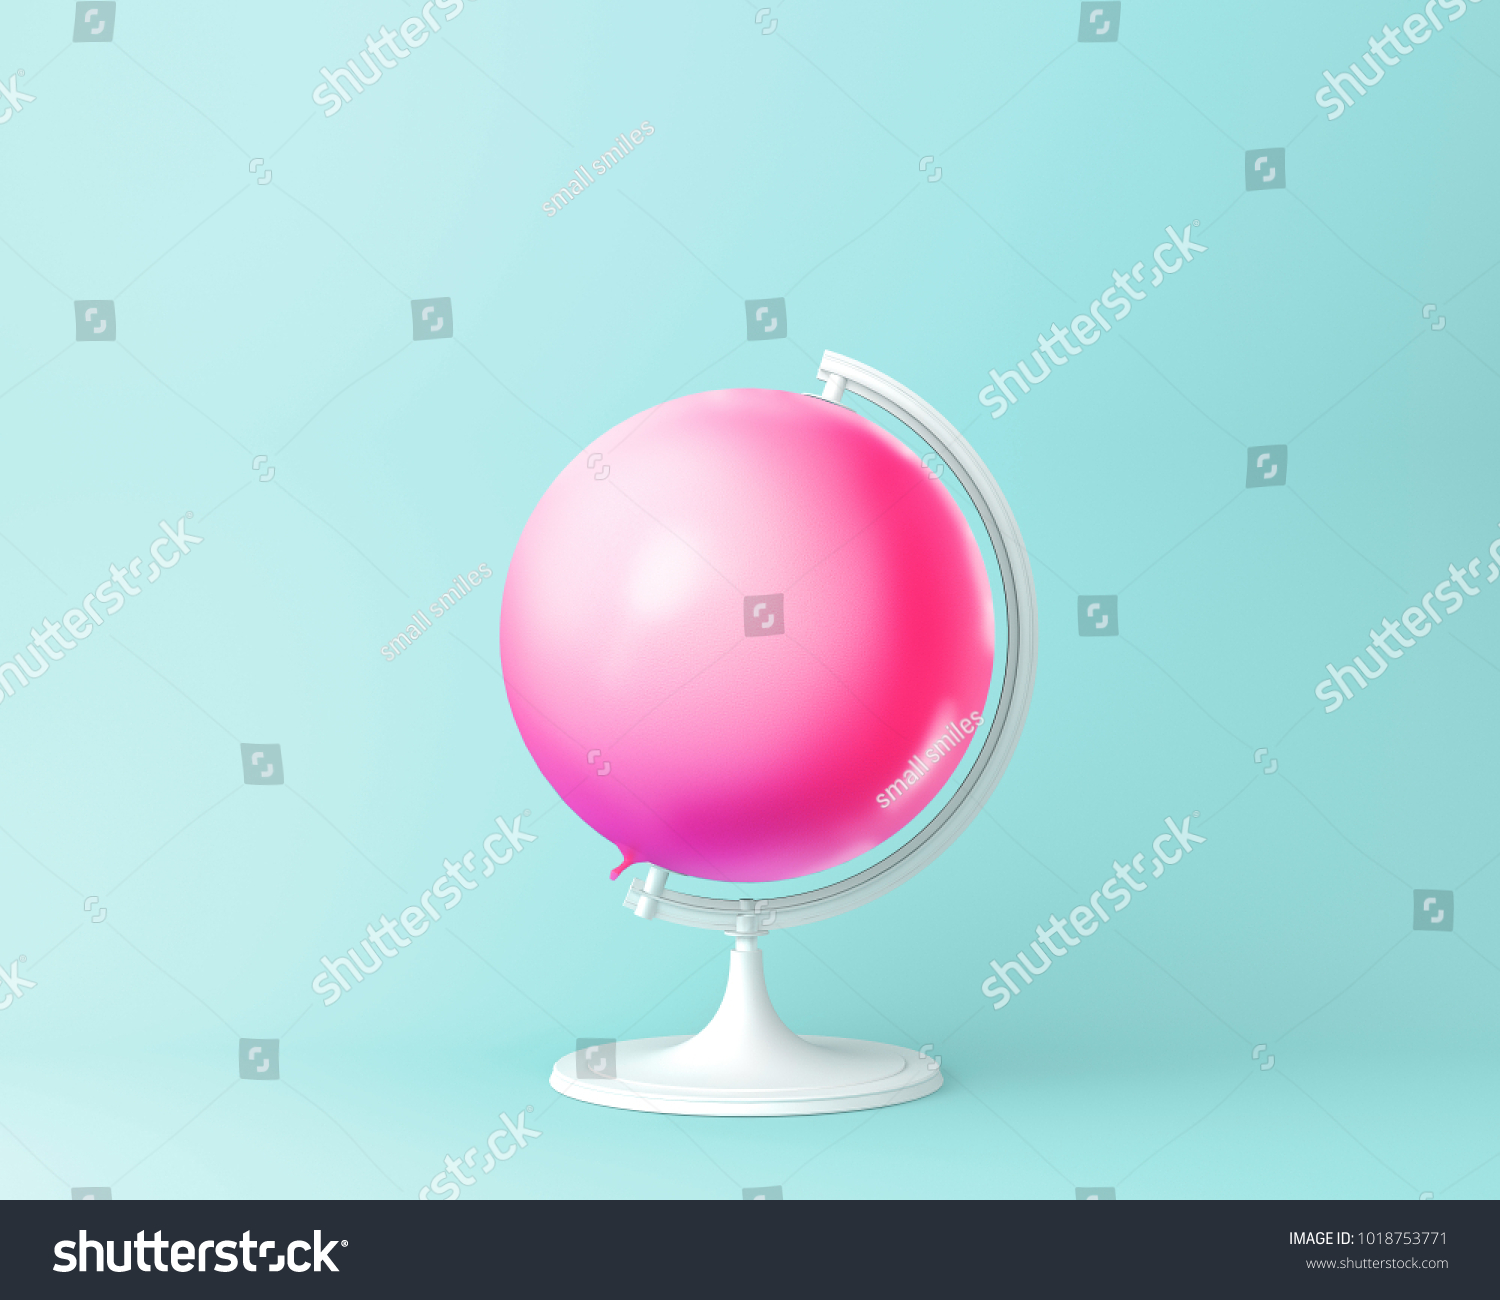 Globe sphere orb balloon pink concept on pastel blue background. minimal idea  concept. An idea creative to produce work within an advertising marketing communications or artwork design. #1018753771